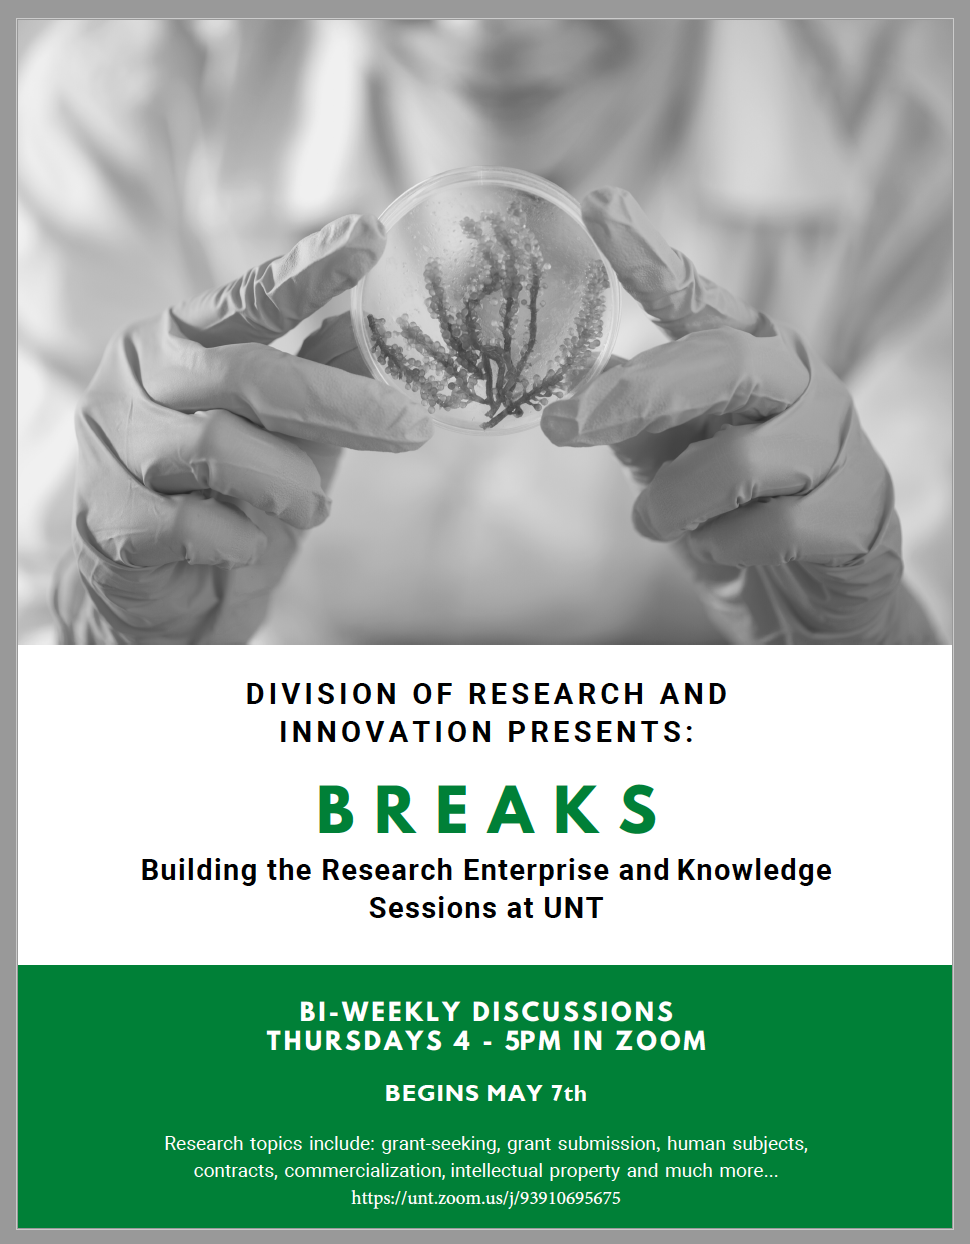 Image of flyer for the research breaks series